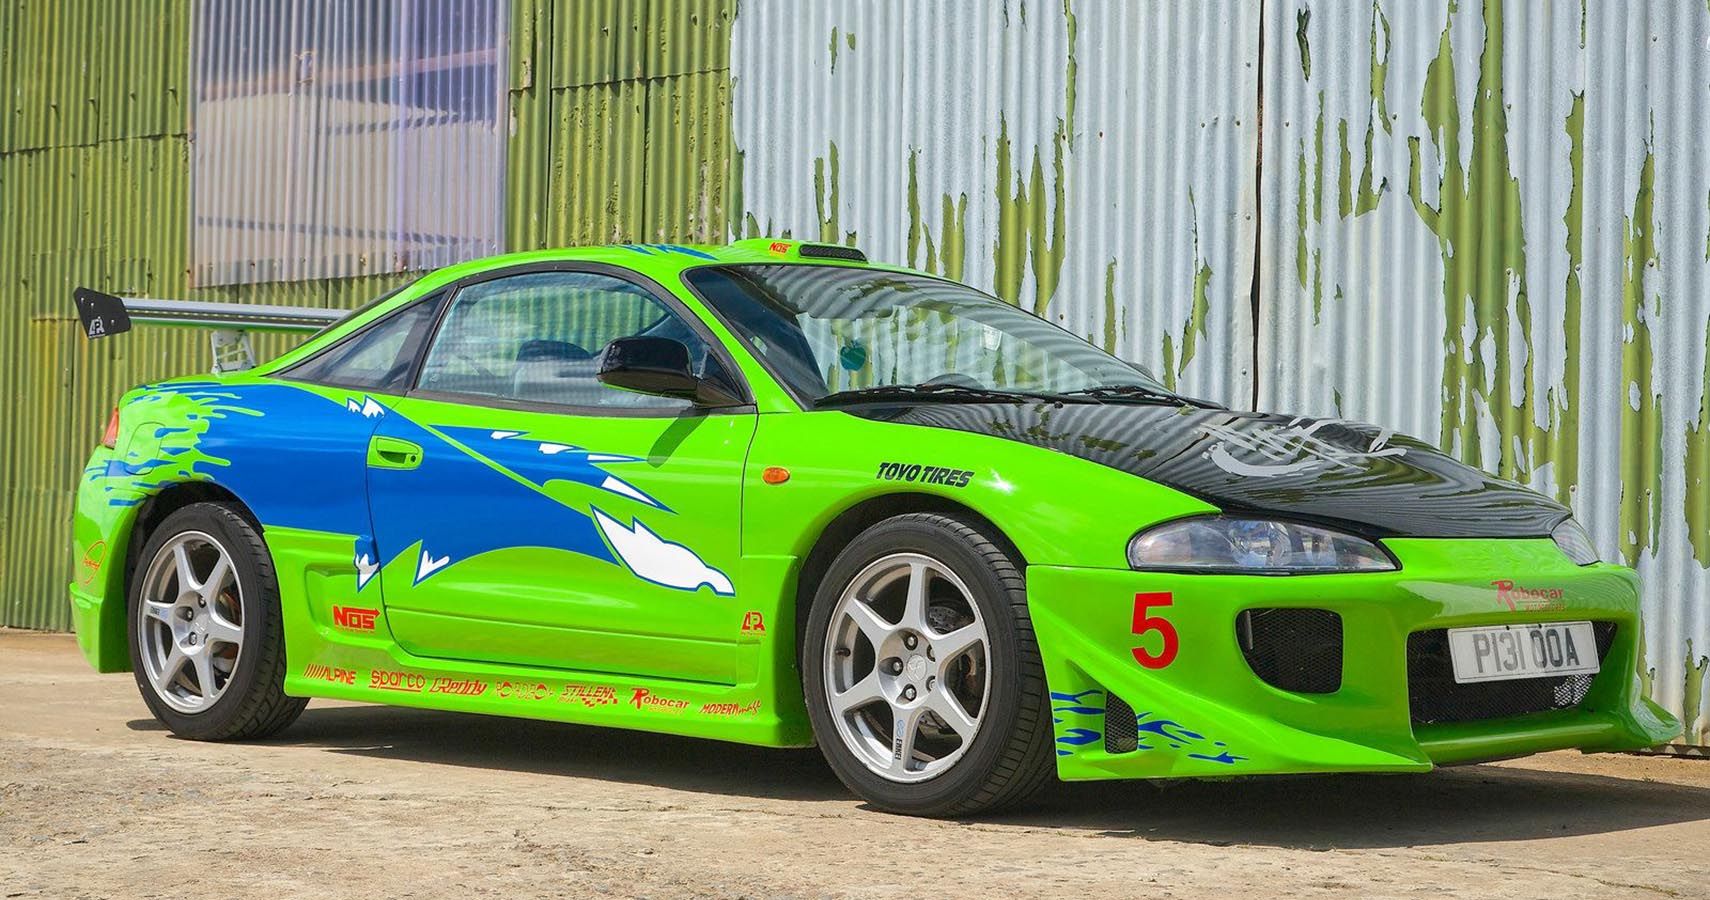 The Stunning Green 1995 Mitsubishi Eclipse Driven By Paul Walker in 